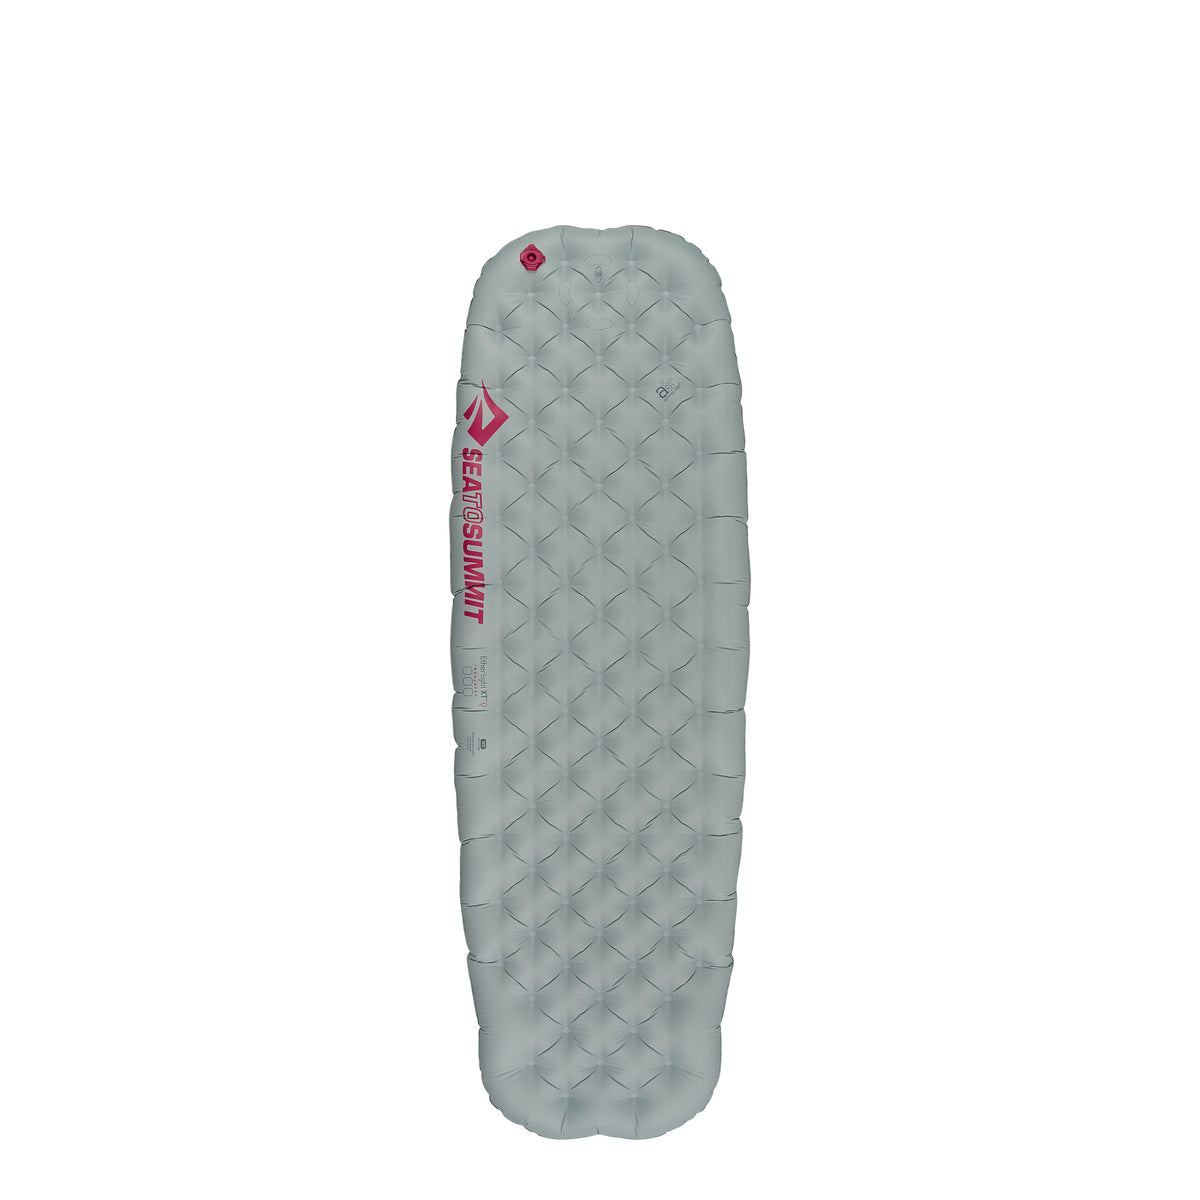 Sea to Summit Ether Light XT Extreme Cold-Weather Insulated Sleeping Pad,  Women's Regular (66 x 21.5 x 4 inches)